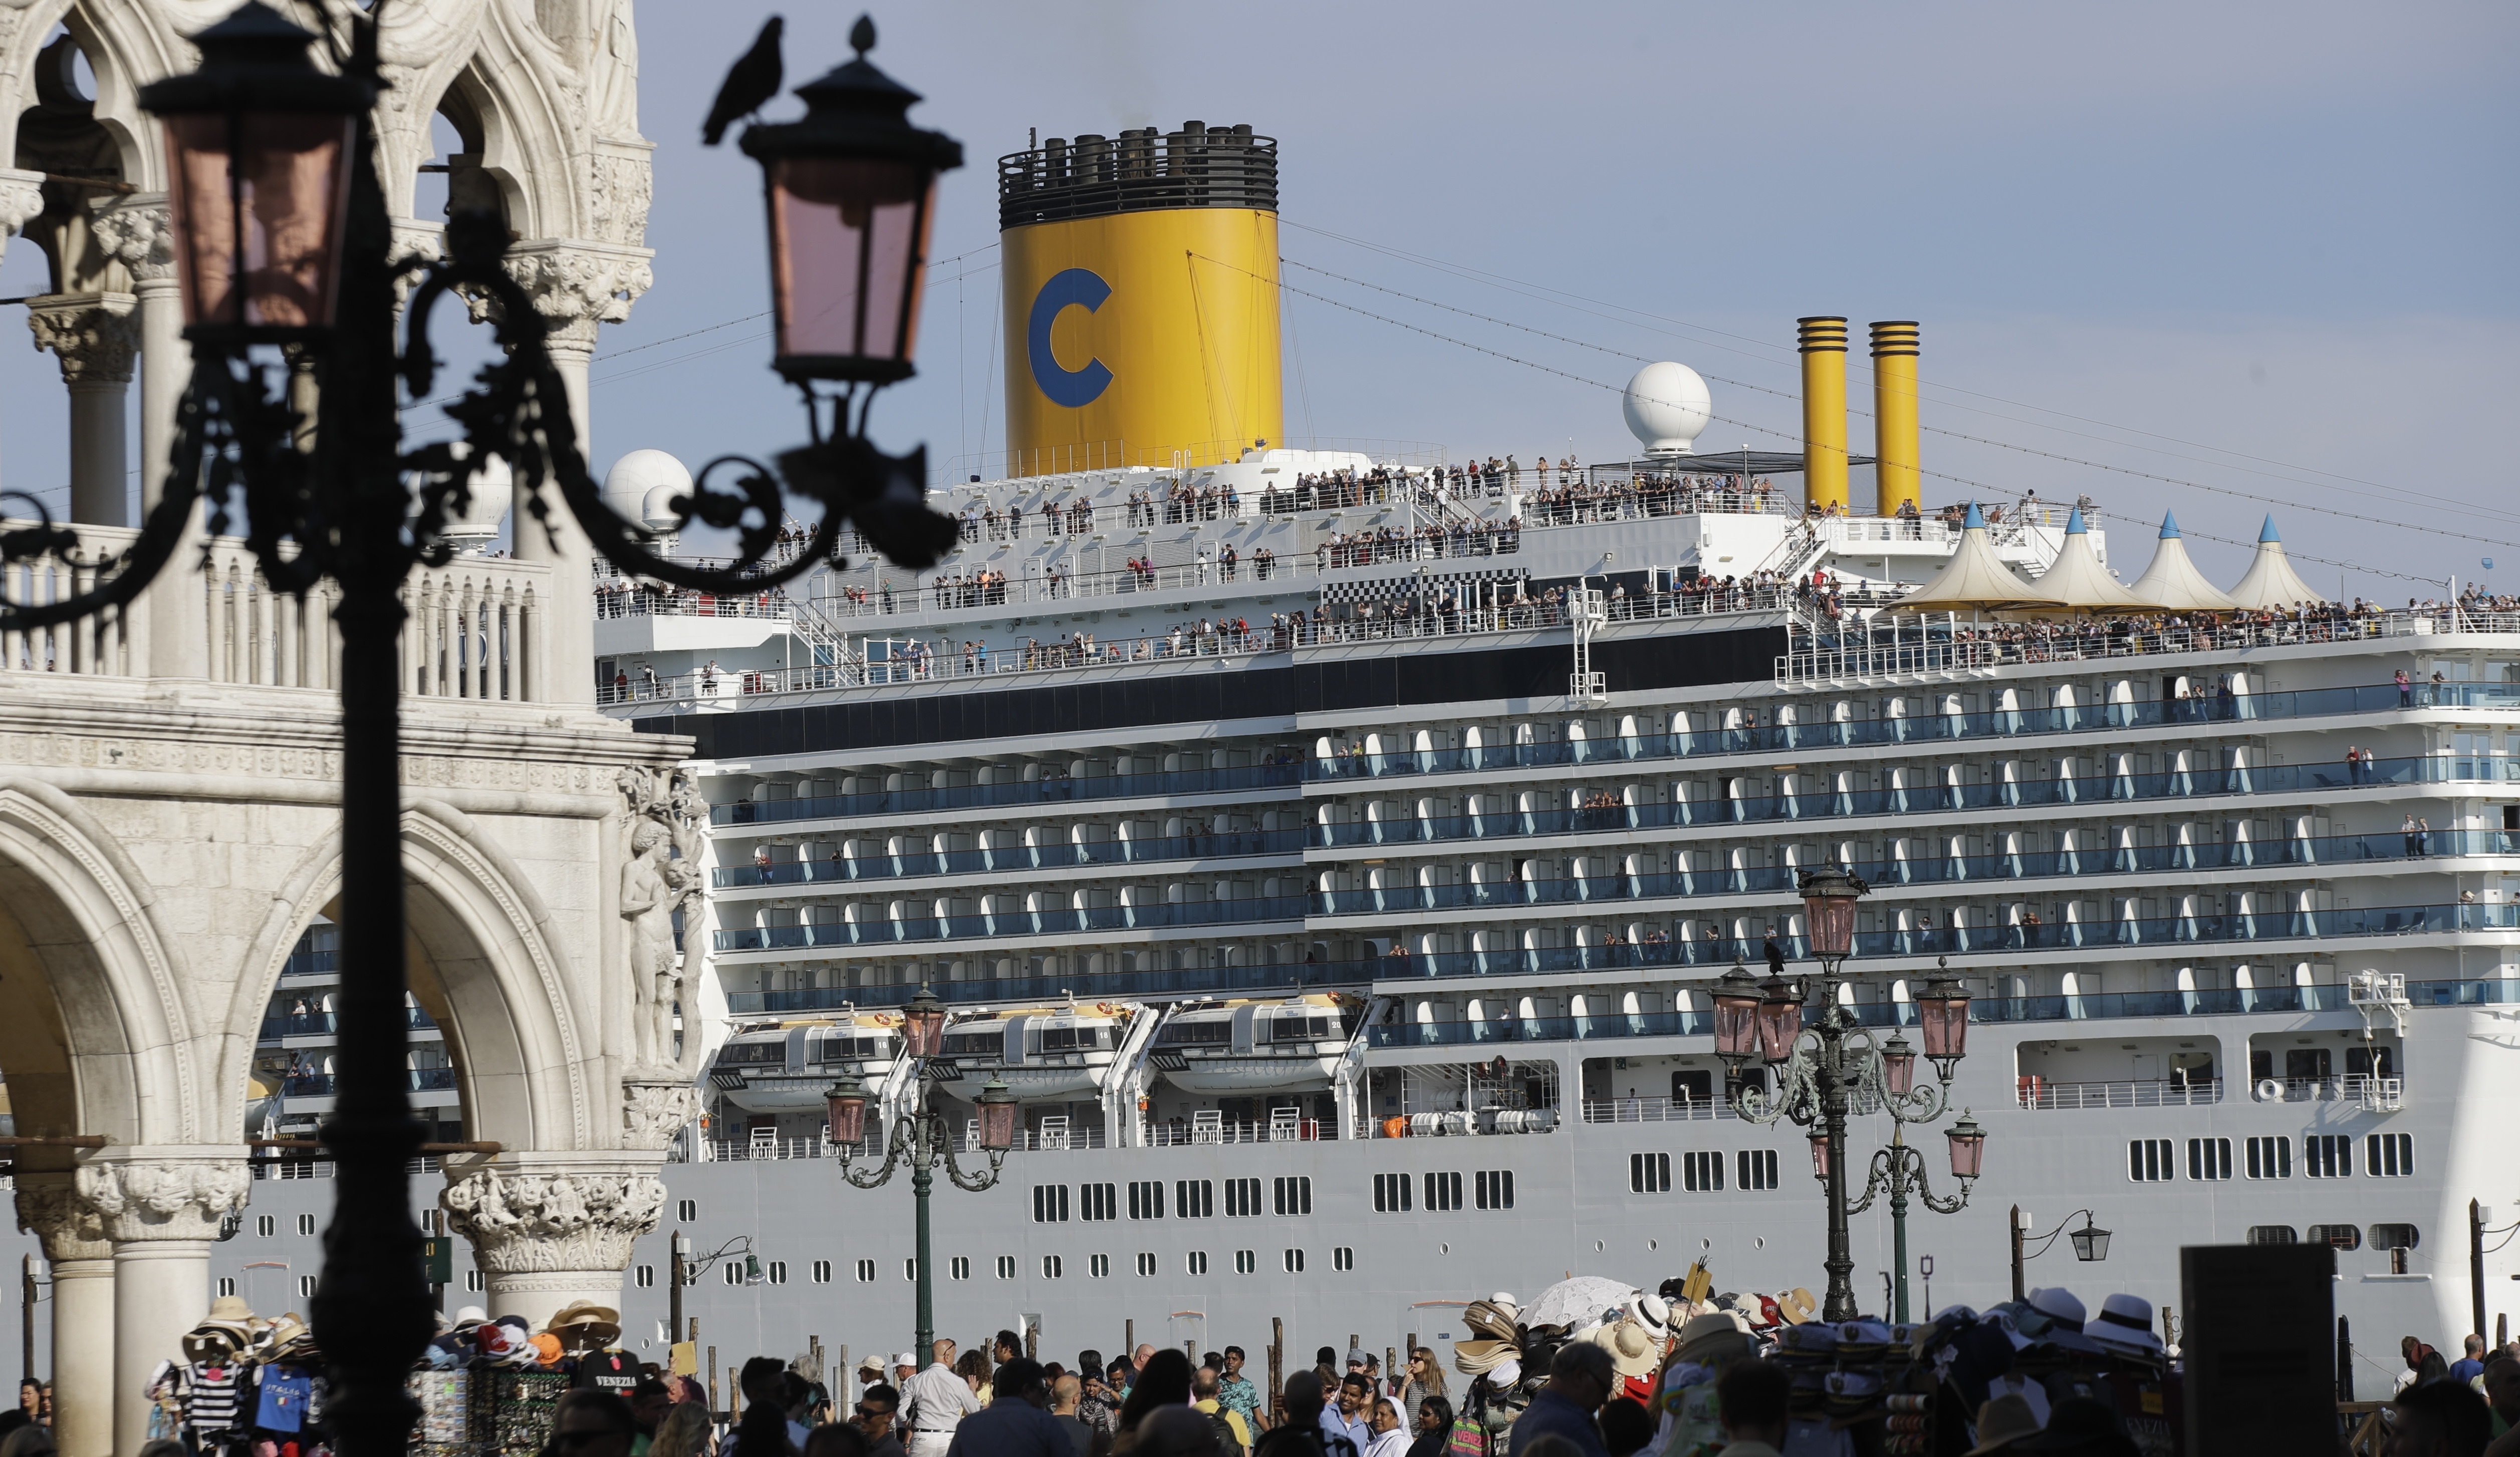 A cruise ship passes by St. Mark's Square in Venice, Italy, Sunday, June 2, 2019. Groups that want to ban cruise ships on Venice's busy canals say a collision that injured four tourists has served as a wake-up call. Opponents say cruise ships are out-of-scale for Venice, cause pollution, threaten the lagoon's ecosystem and dangerous. (AP Photo/Luca Bruno)